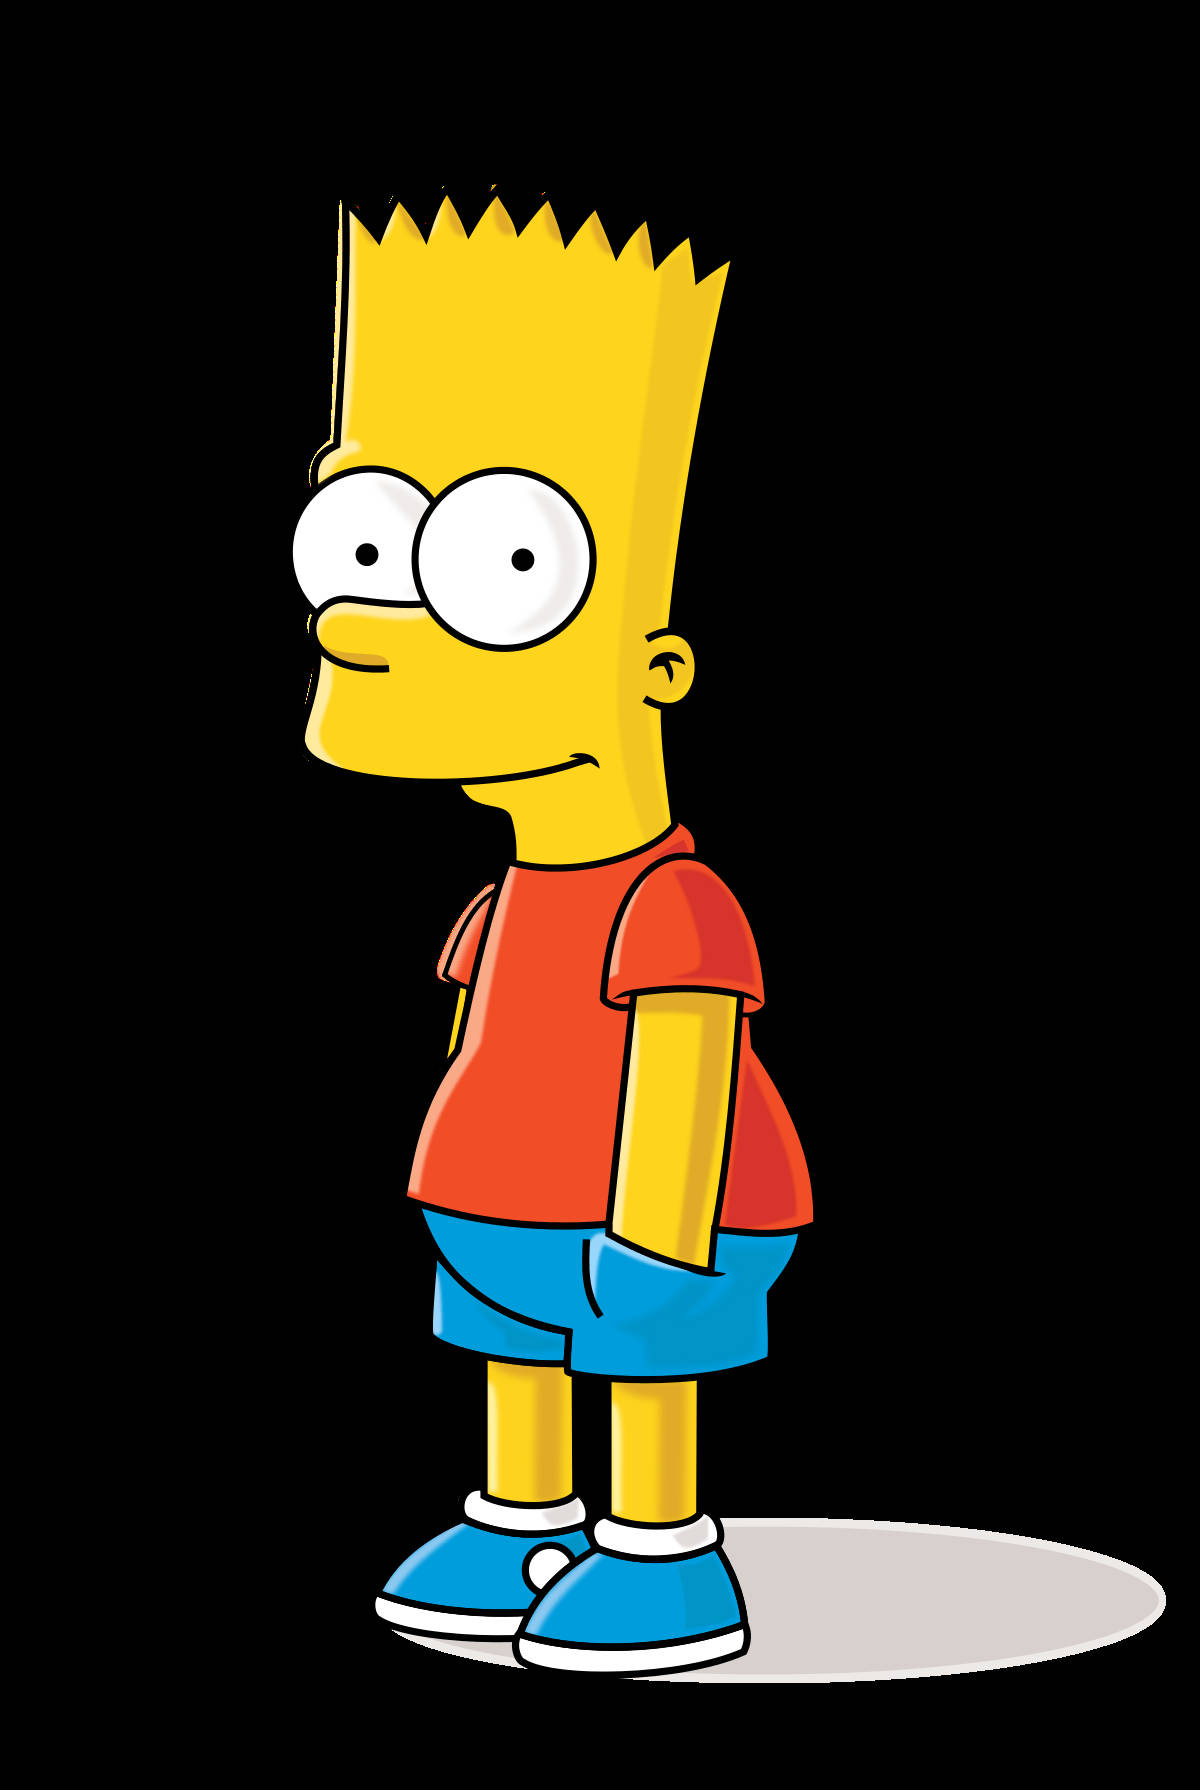 Bart Simpson From The Simpsons Wallpaper